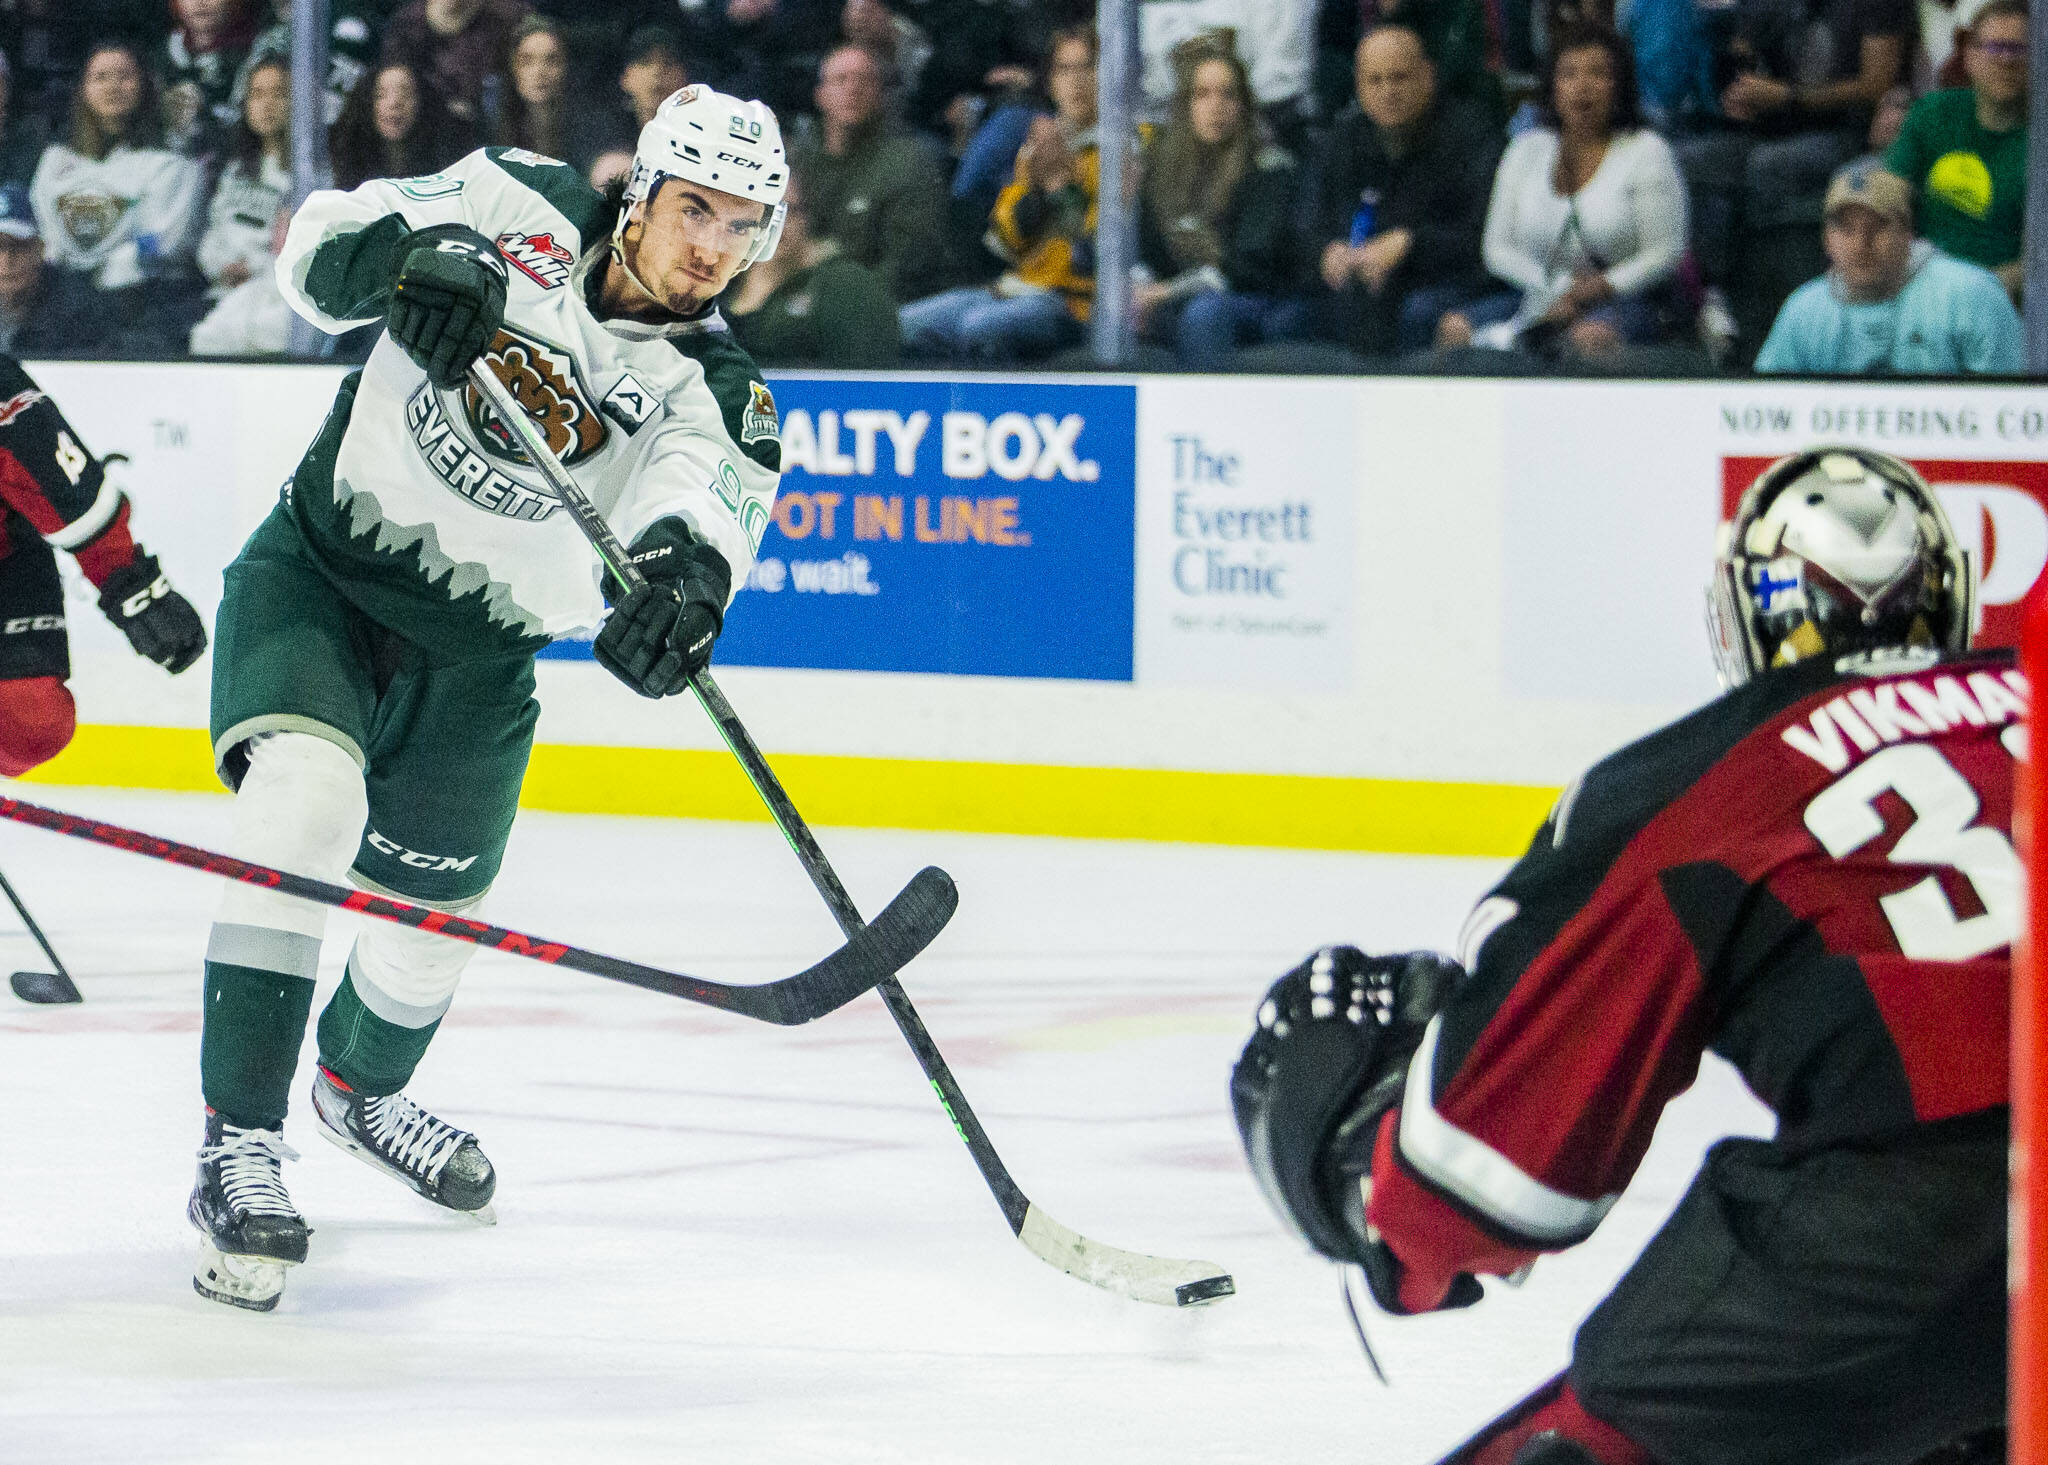 Silvertips’ Alex Swetlikoff takes a shot on goal during the second period of the game against the Giants on Saturday, April 30, 2022 in Everett, Washington. (Olivia Vanni / The Herald)